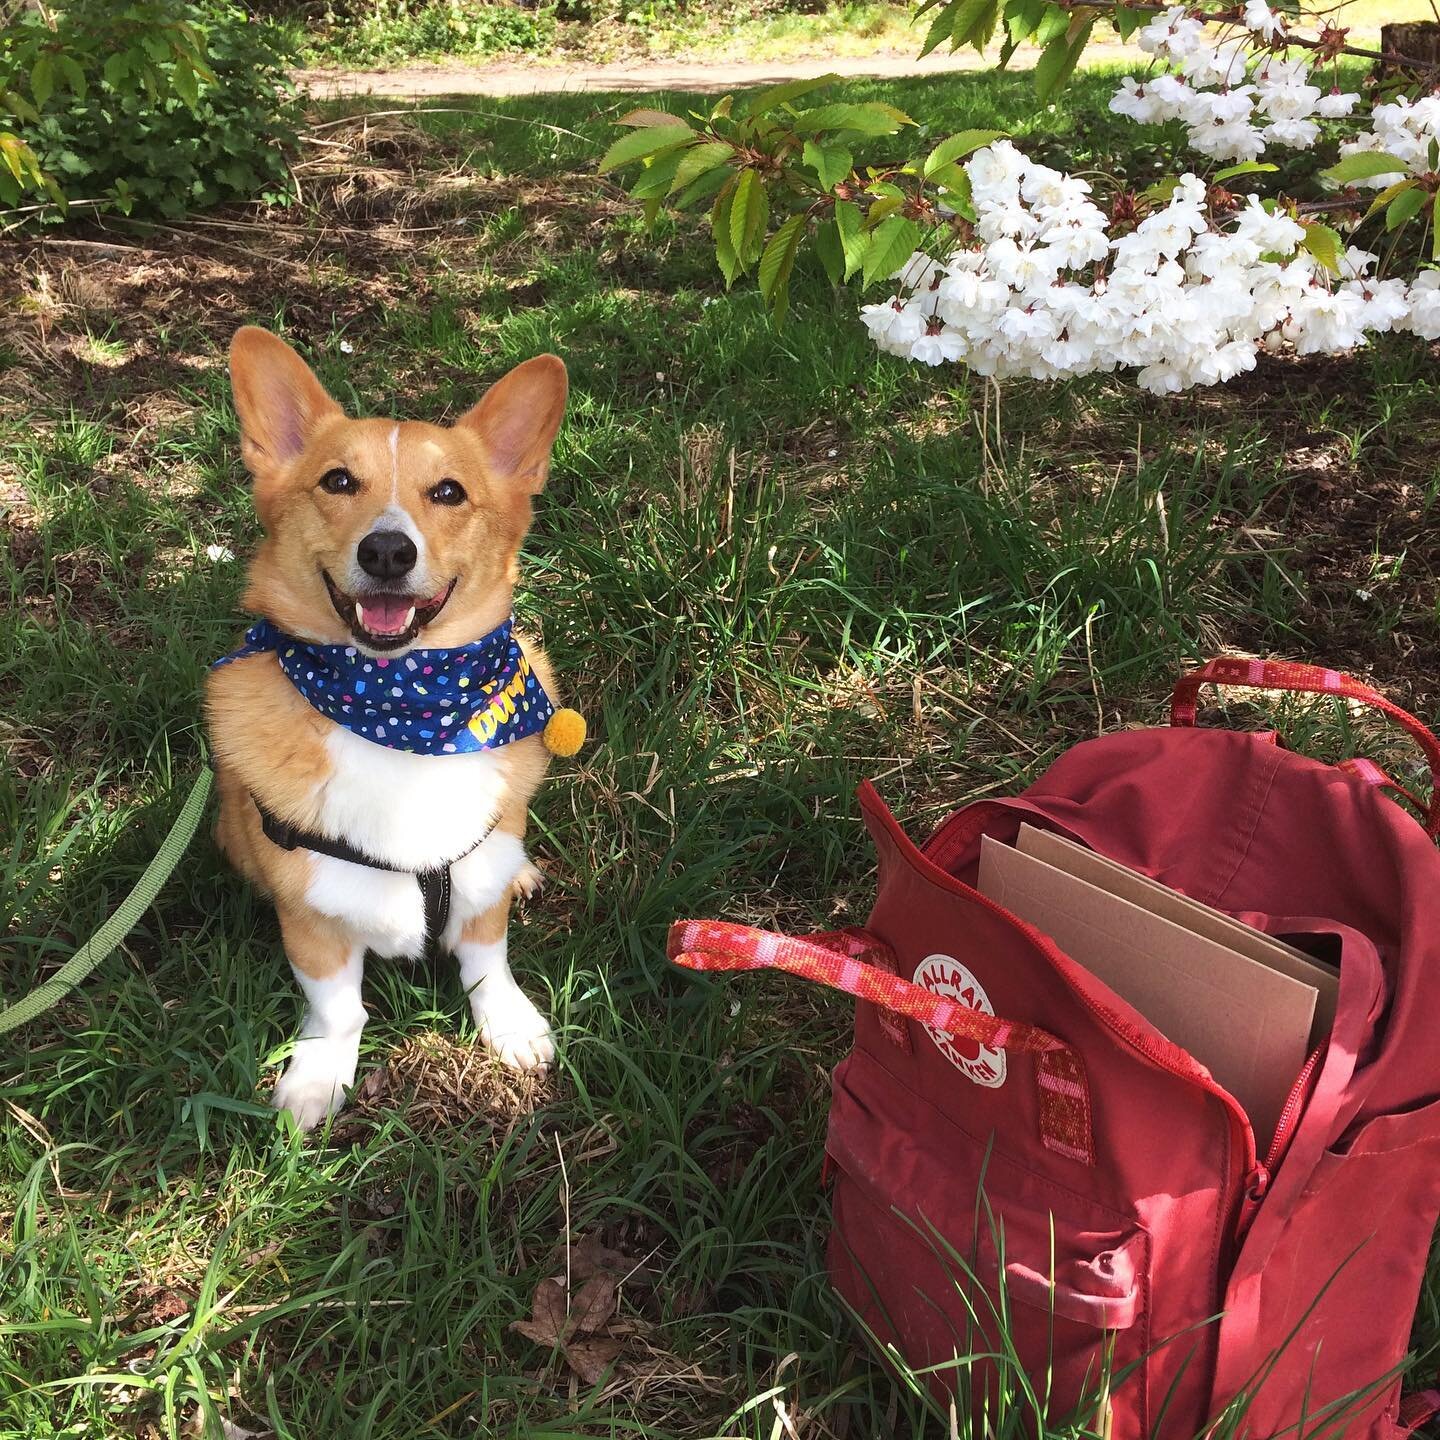 Hello from me and Hux! 💛🌈
We&rsquo;ve been busy packing orders and painting pet portraits this week, so here&rsquo;s an oldie from last spring of Huxley helping on a post day! Cutest helper I could ask for 🐶📮💌